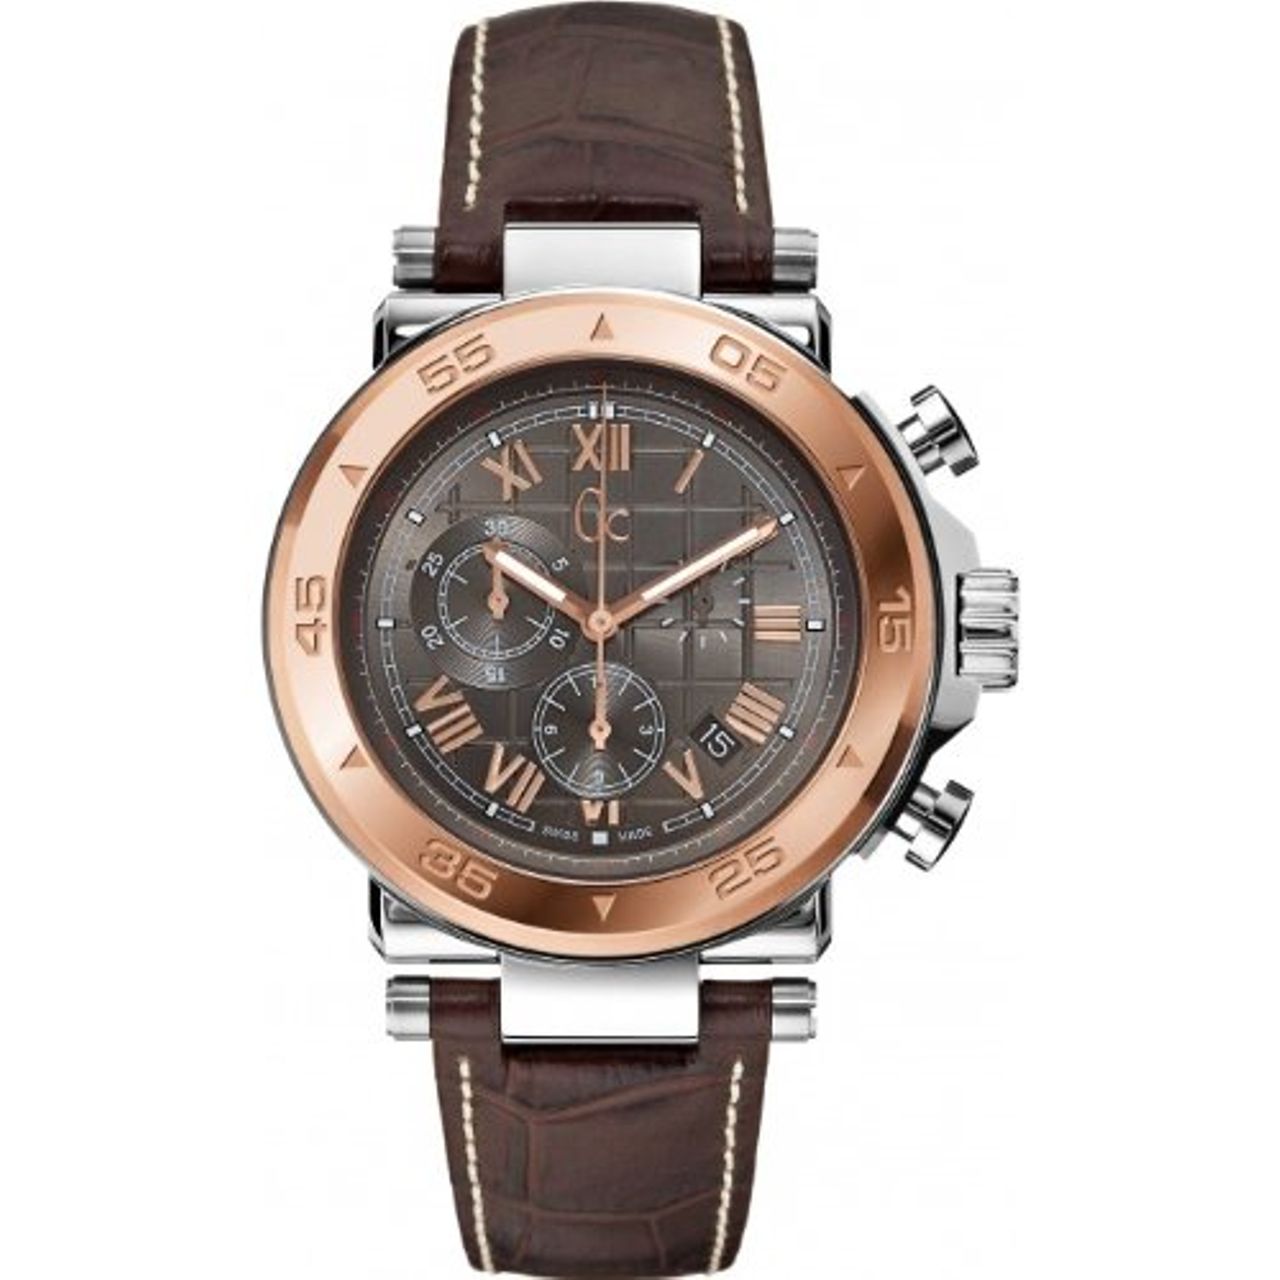 Guess X90005G2S Mens Analog Quartz Watch with Leather Strap